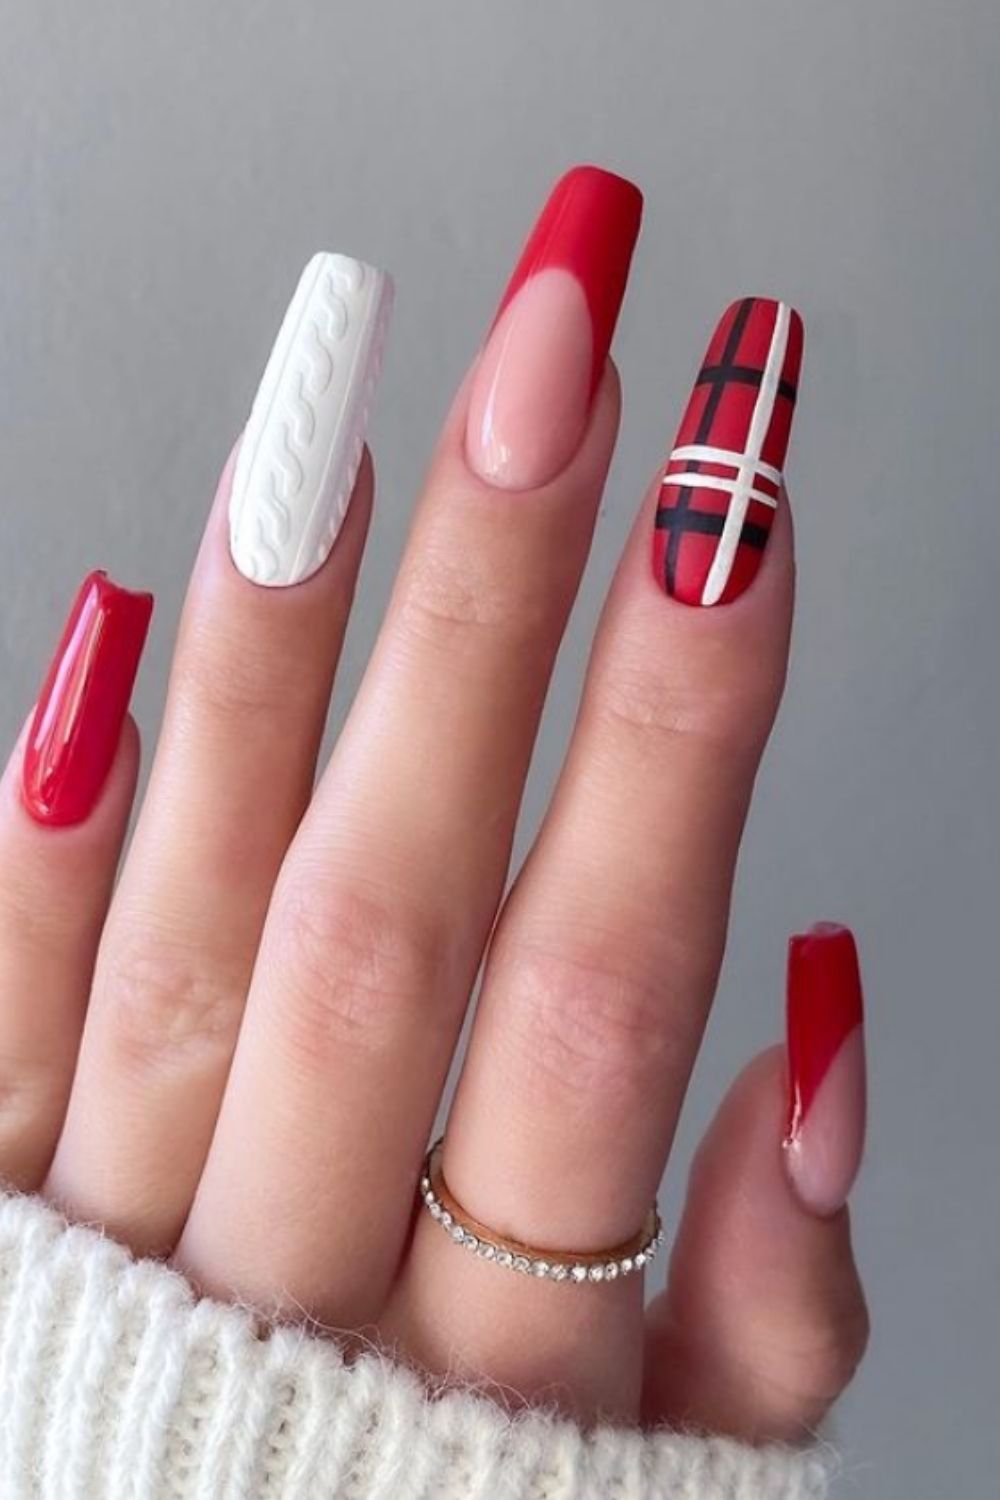 Red and white coffin nails